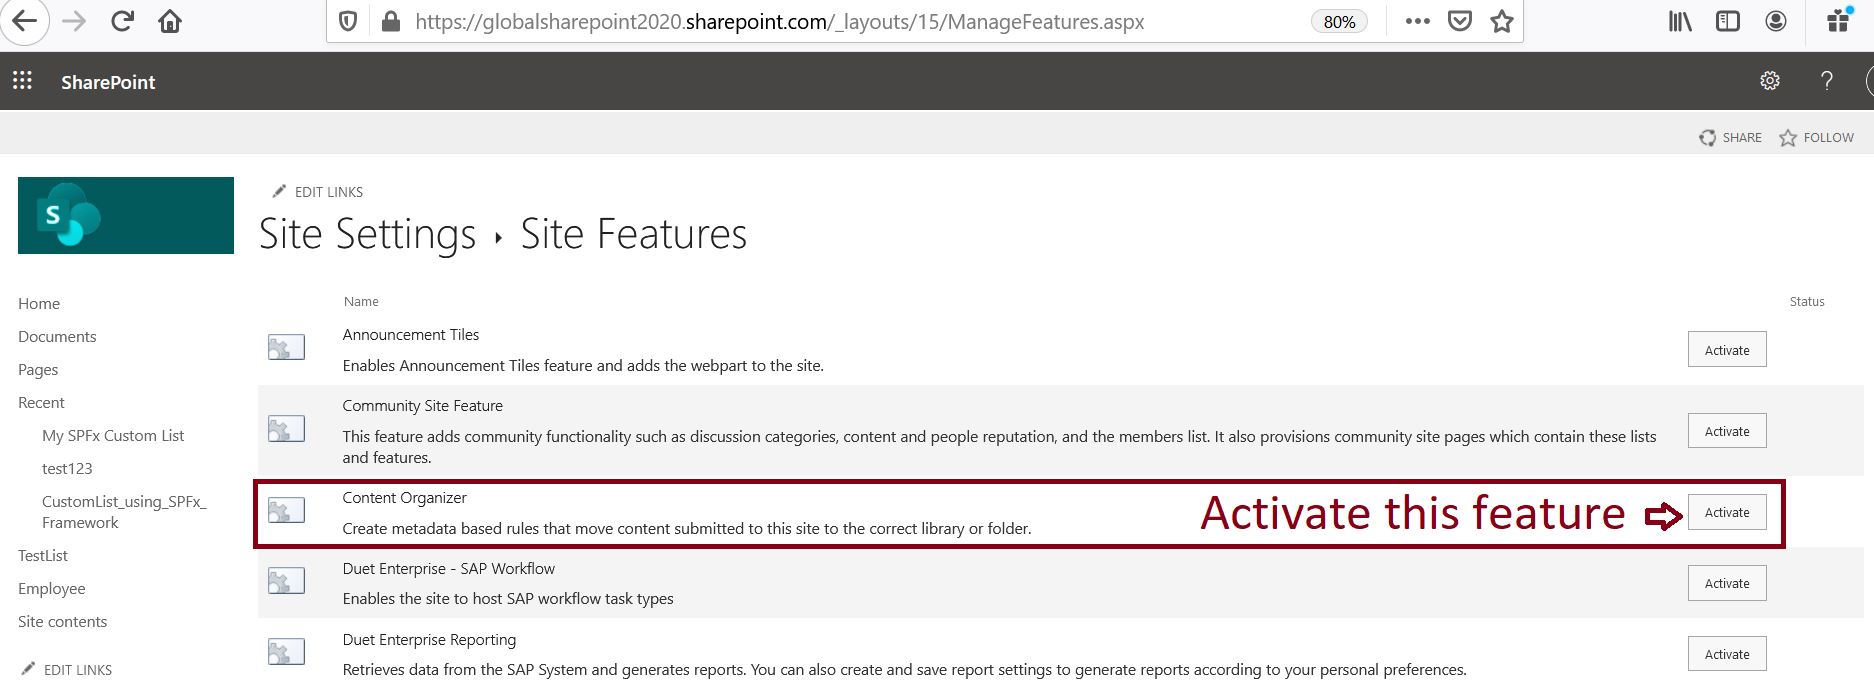 Activate content organizer site level feature in SharePoint Online